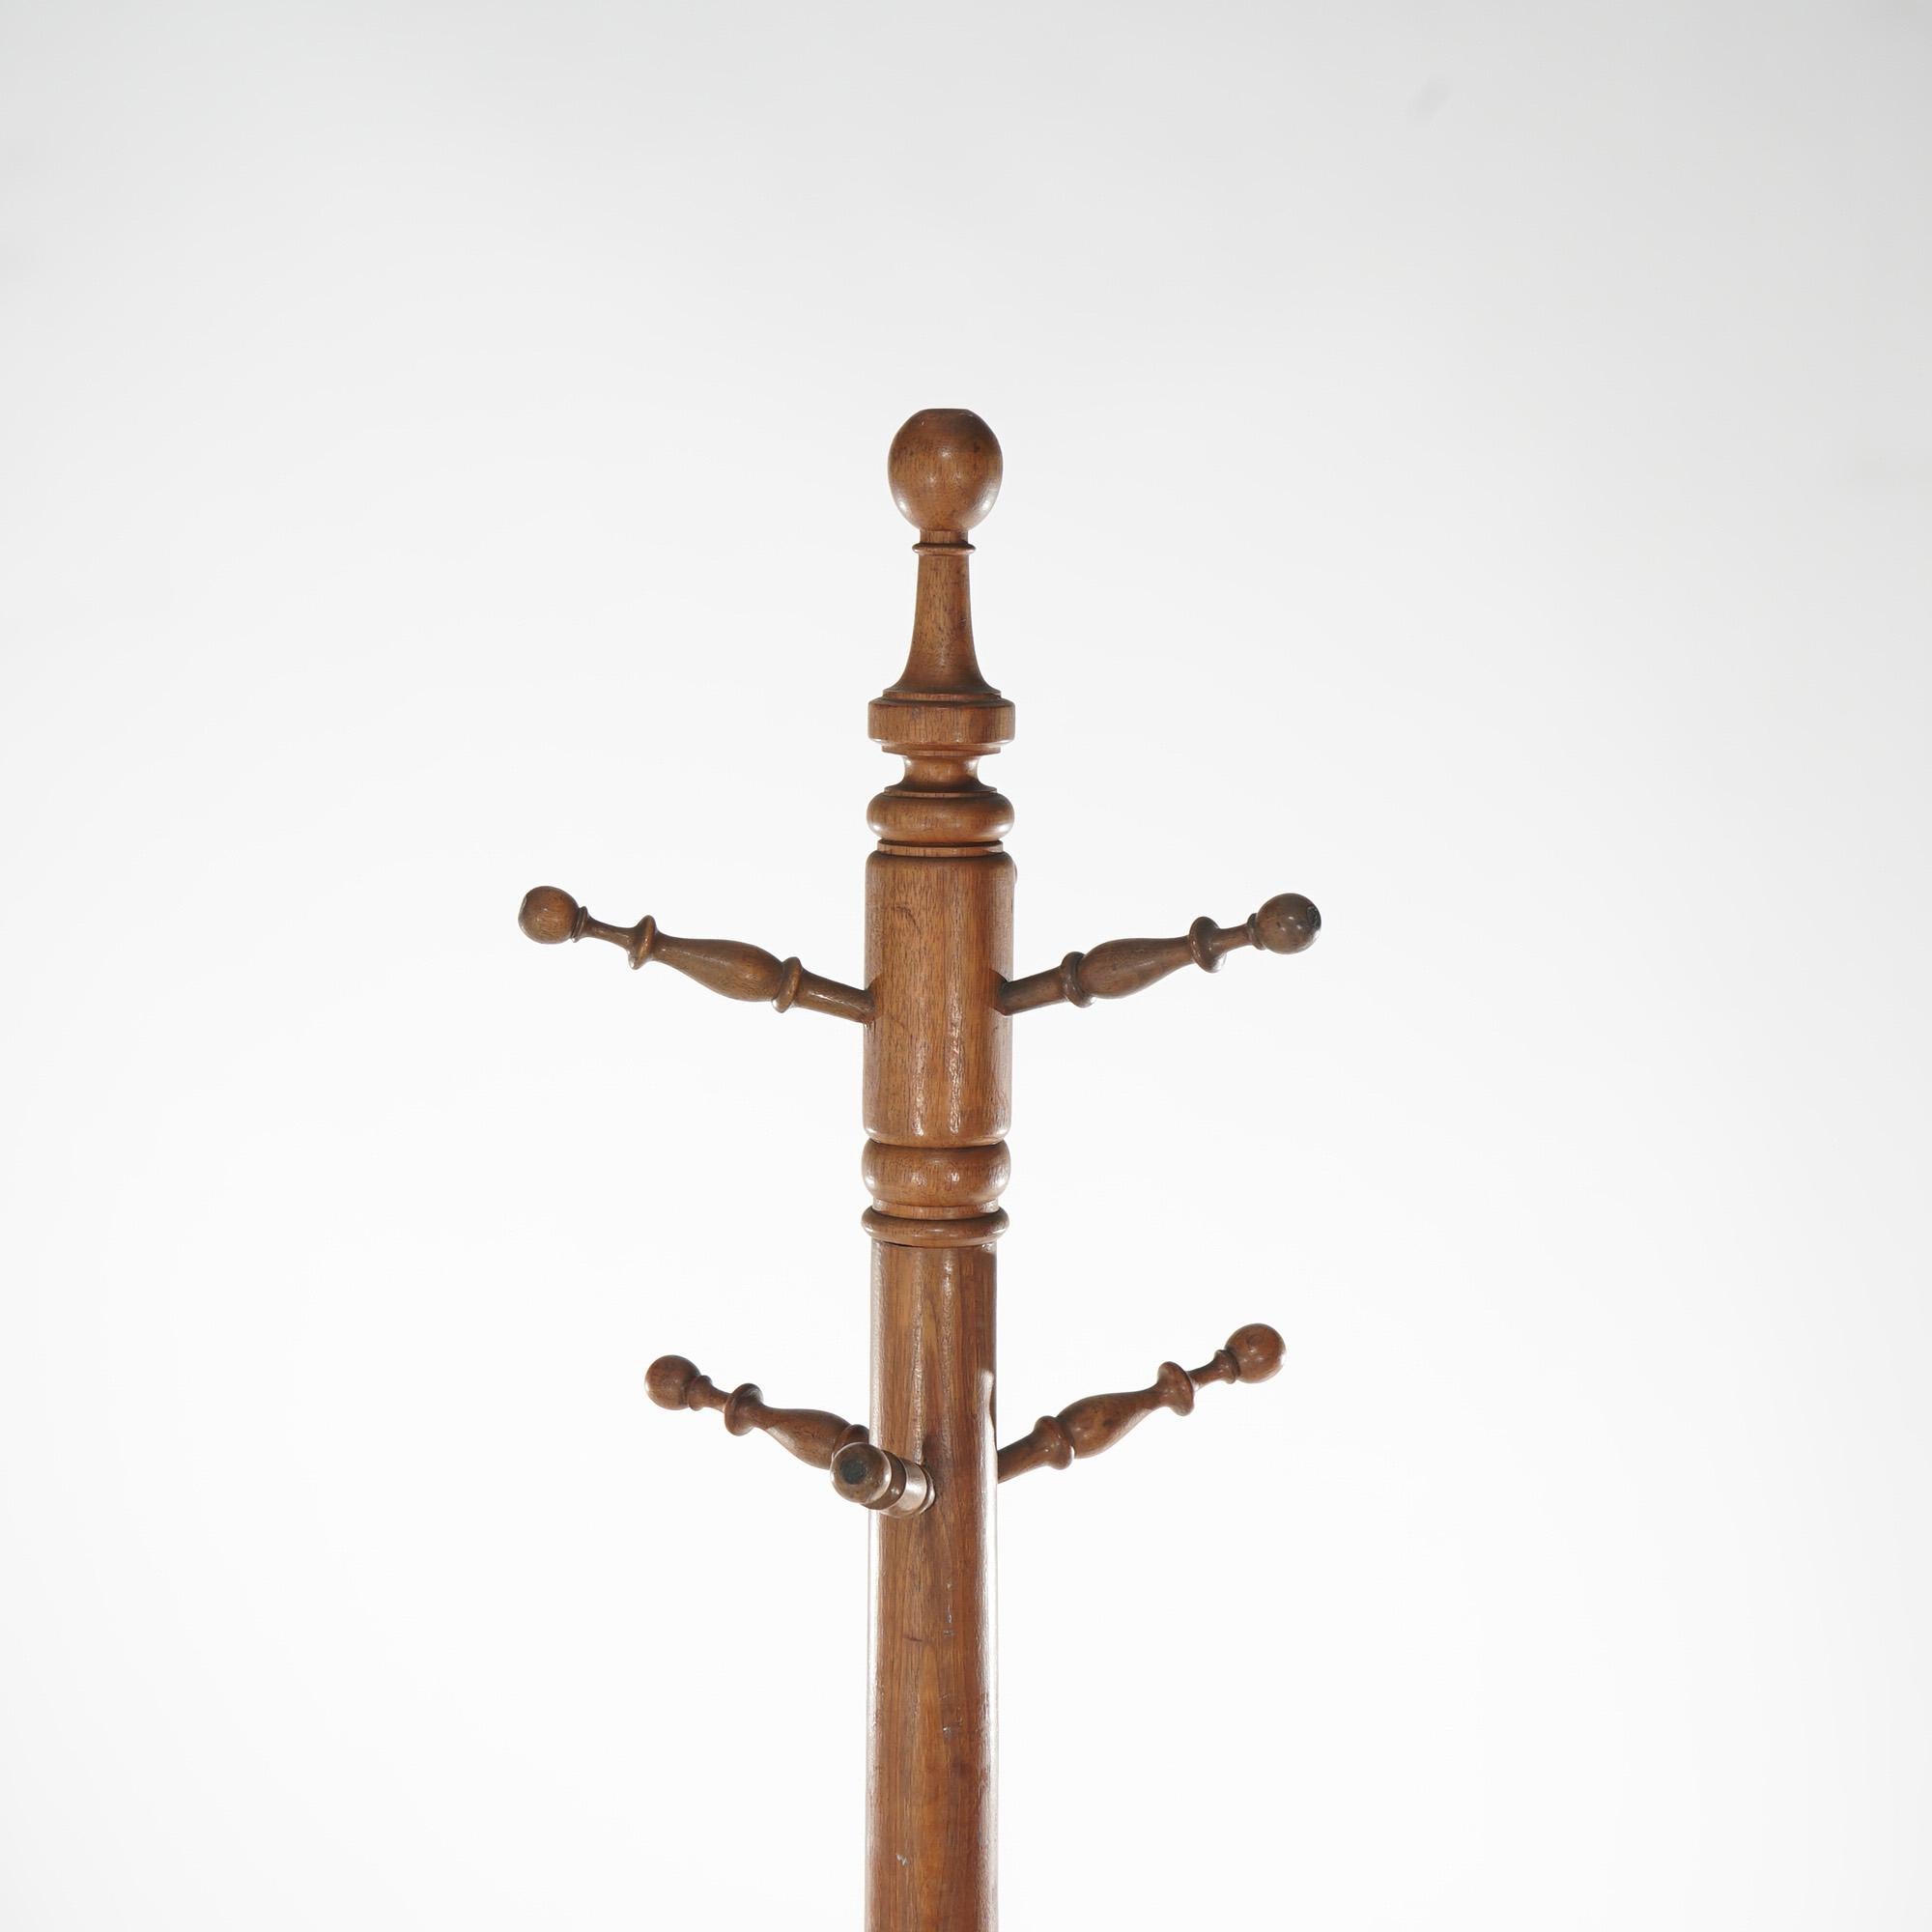 An antique Arts and Crafts hat rack offers mahogany construction with turned column and hat pegs, raised on quadruped base, c1930

Measures - 75.5